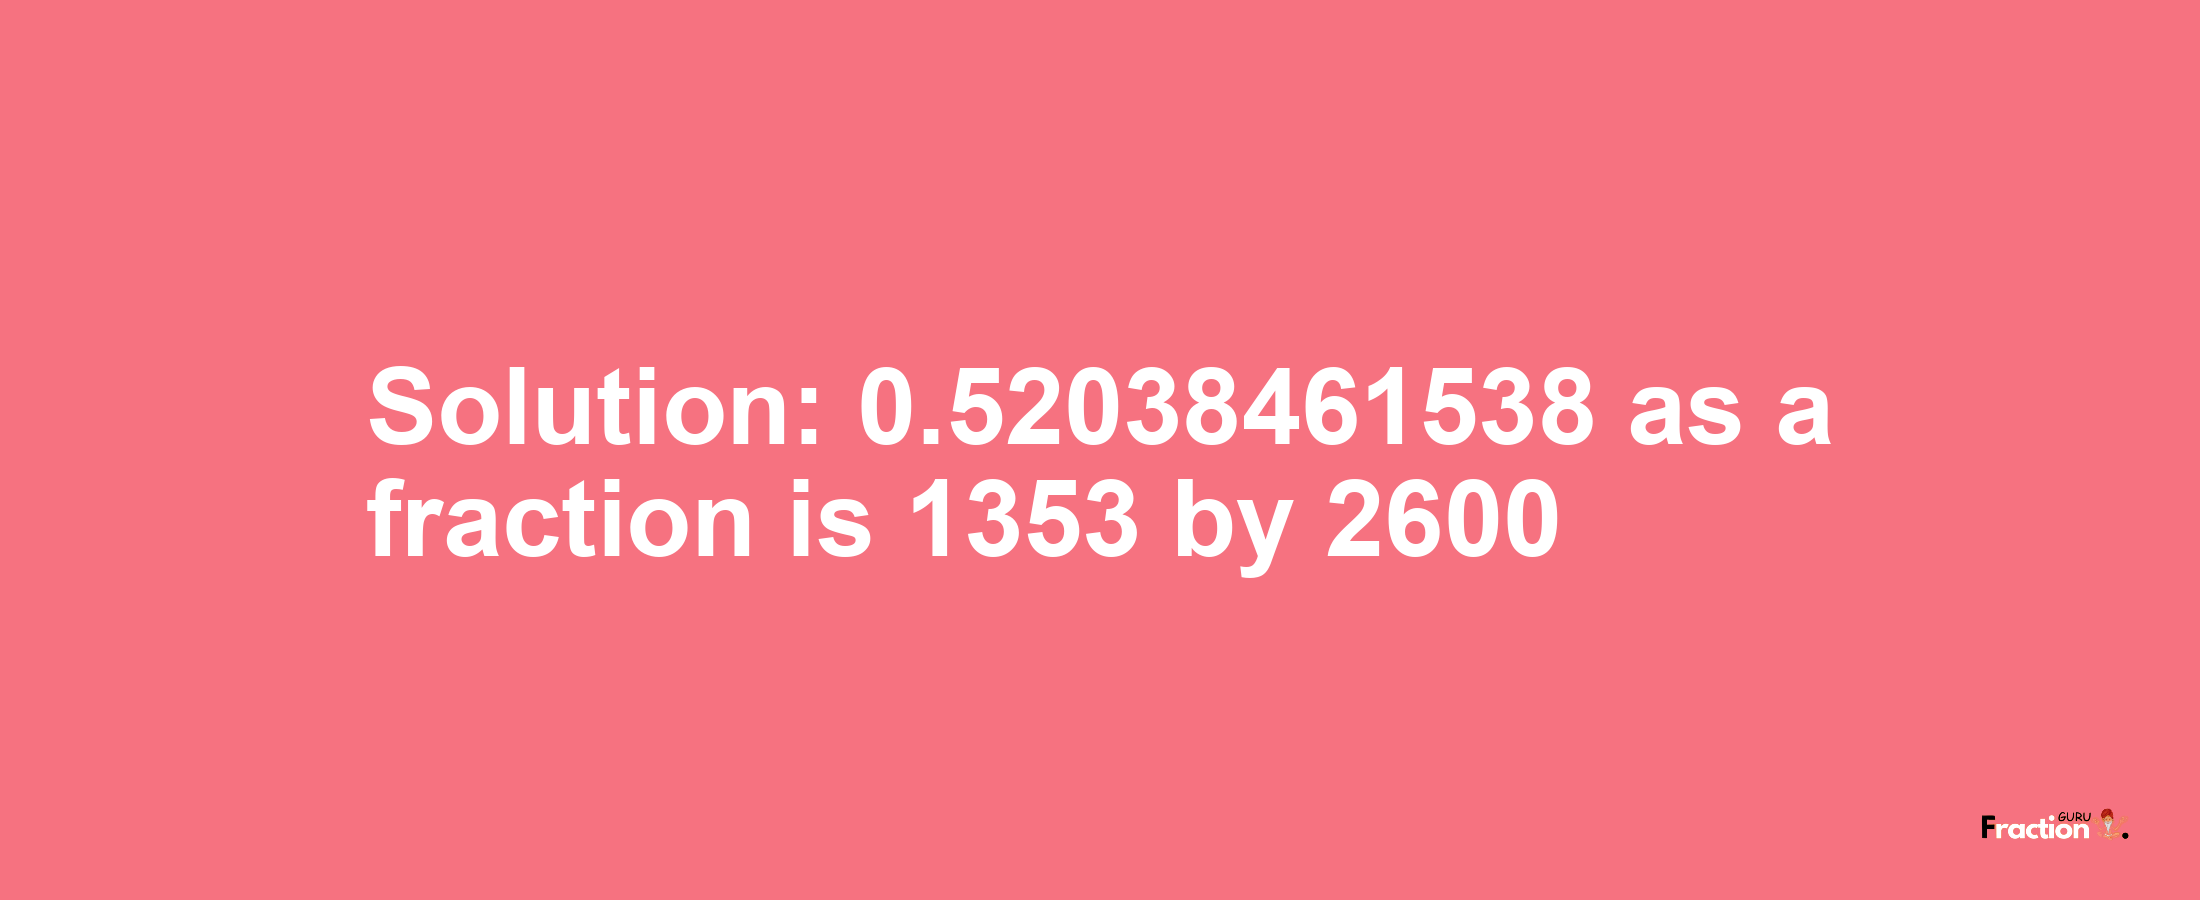 Solution:0.52038461538 as a fraction is 1353/2600